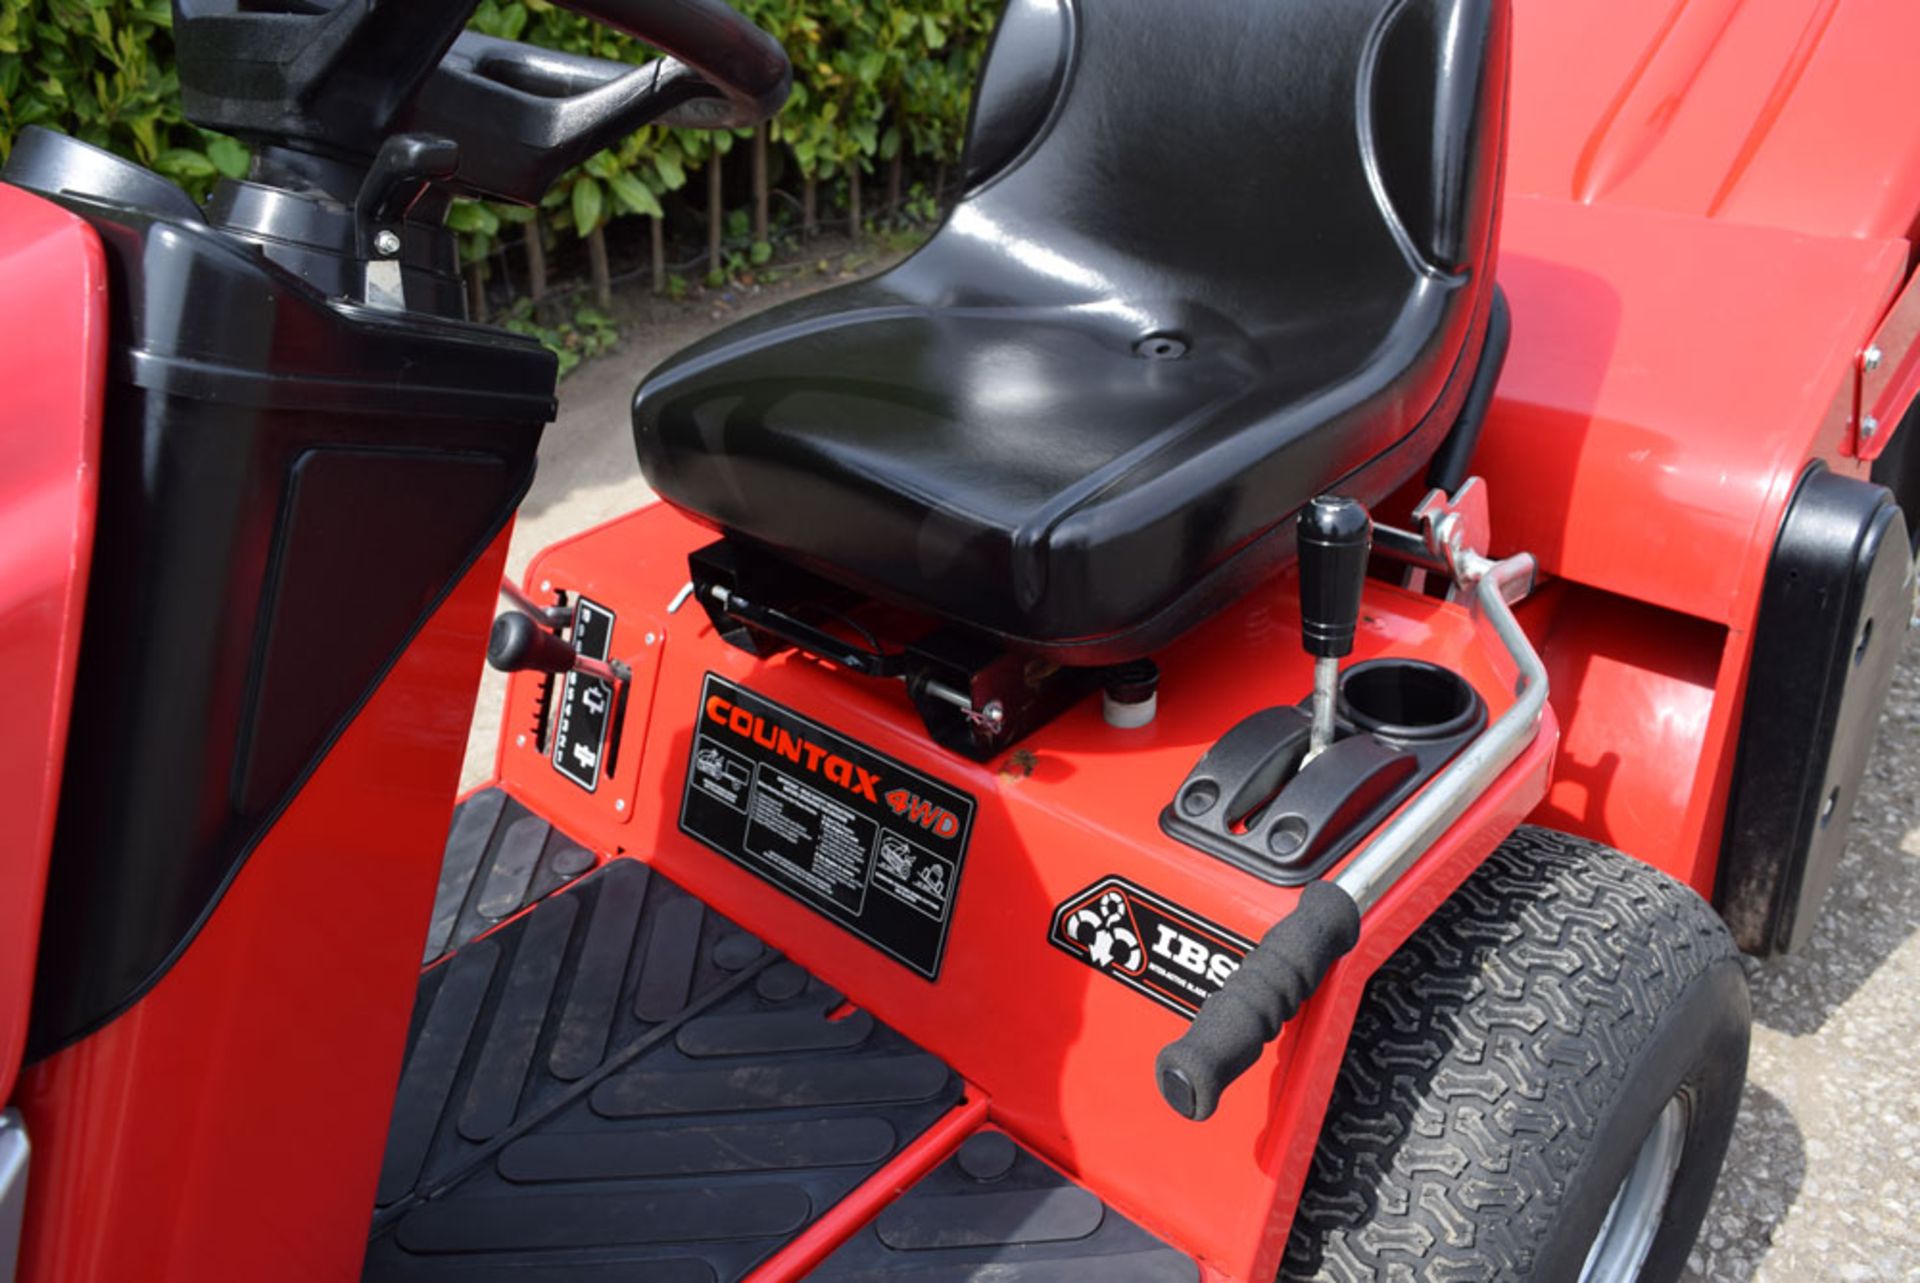 2010 Countax C600H 4WD 40" Rear Discharge Garden Tractor With PGC - Image 4 of 6